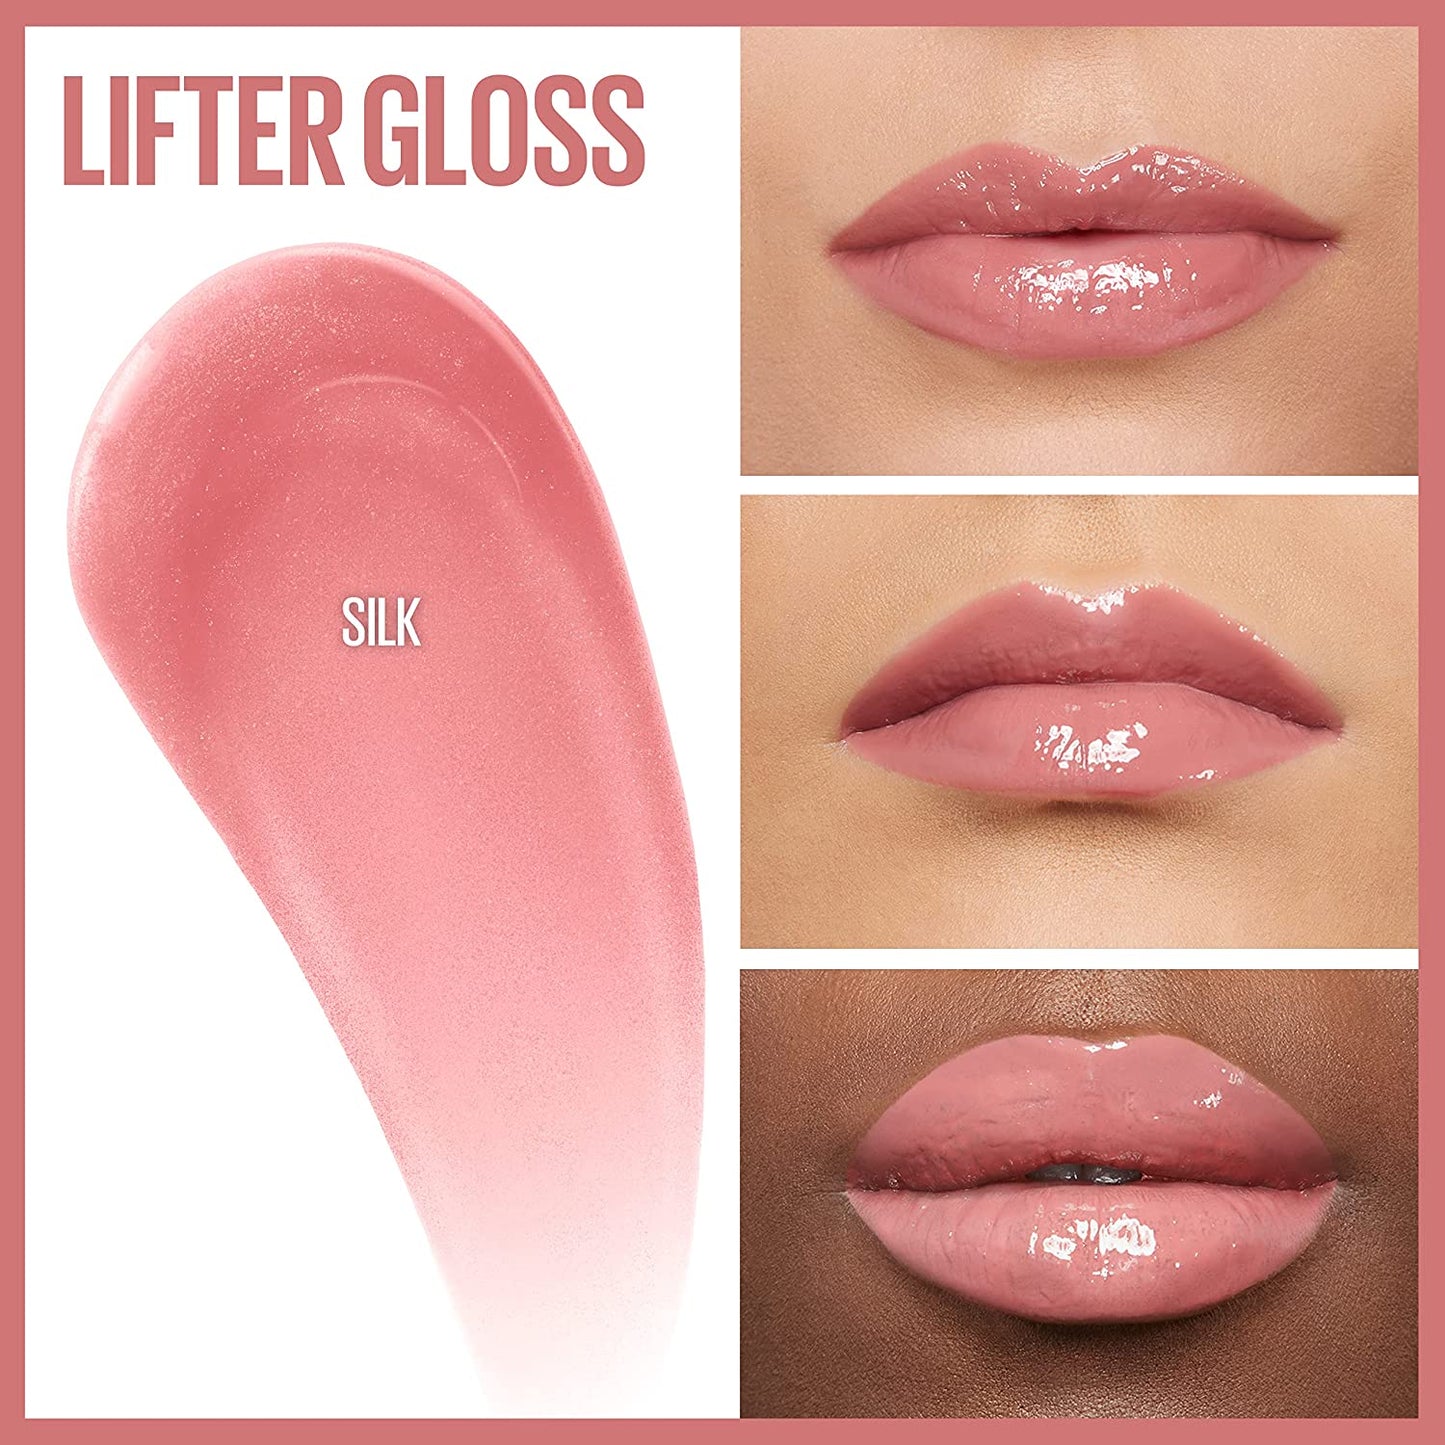 MAYBELLINE LIFTER GLOSS